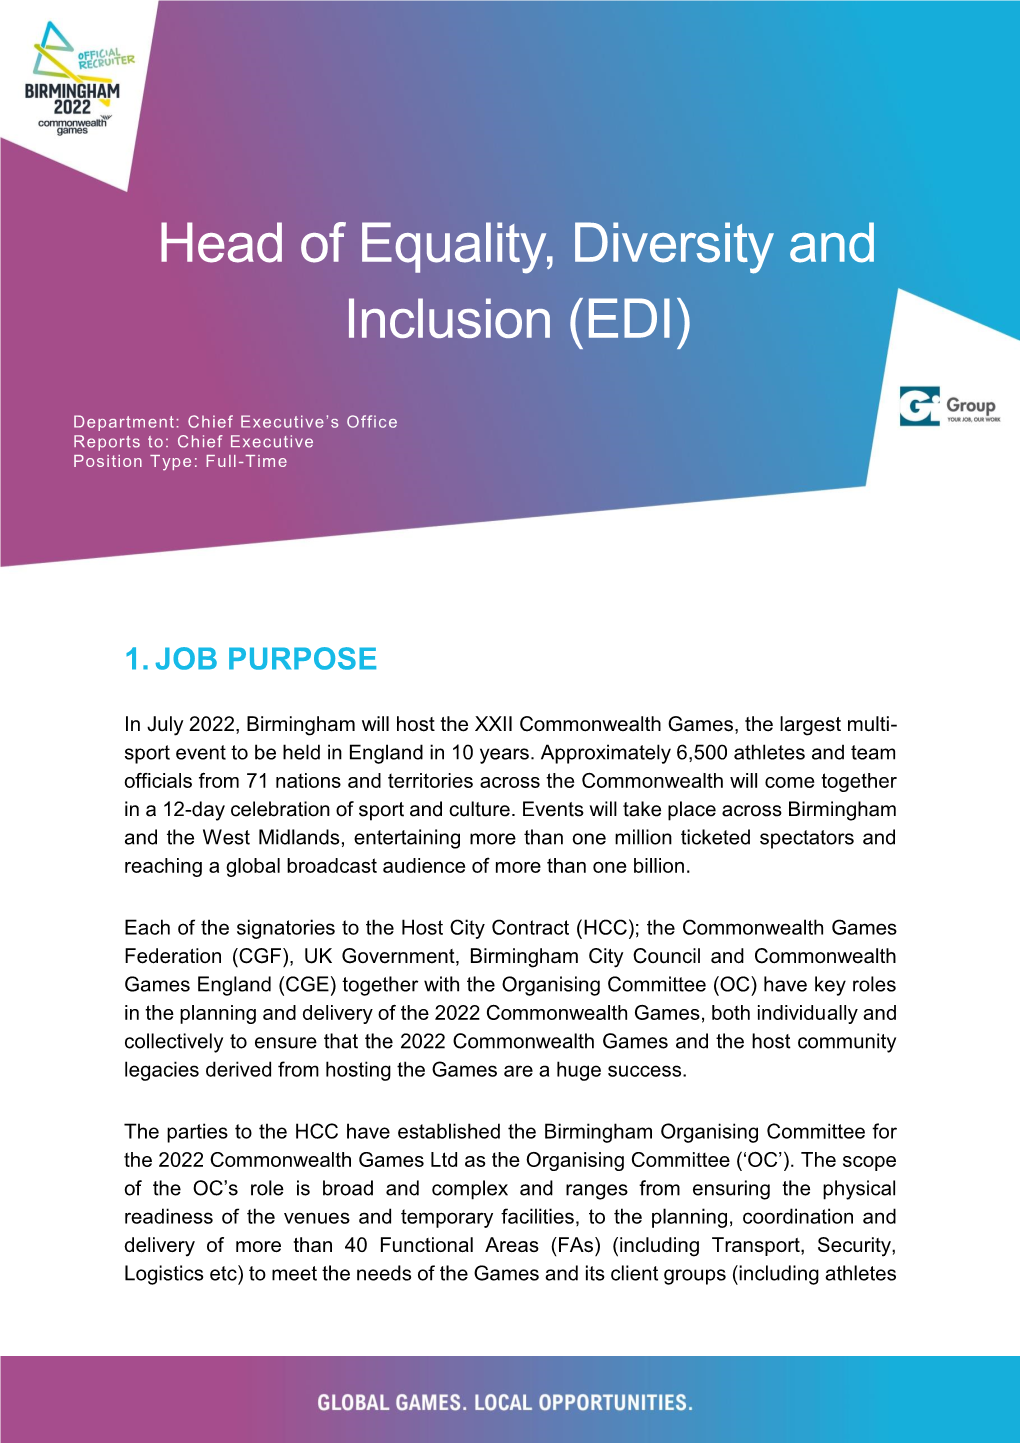 Head of Equality, Diversity and Inclusion (EDI)